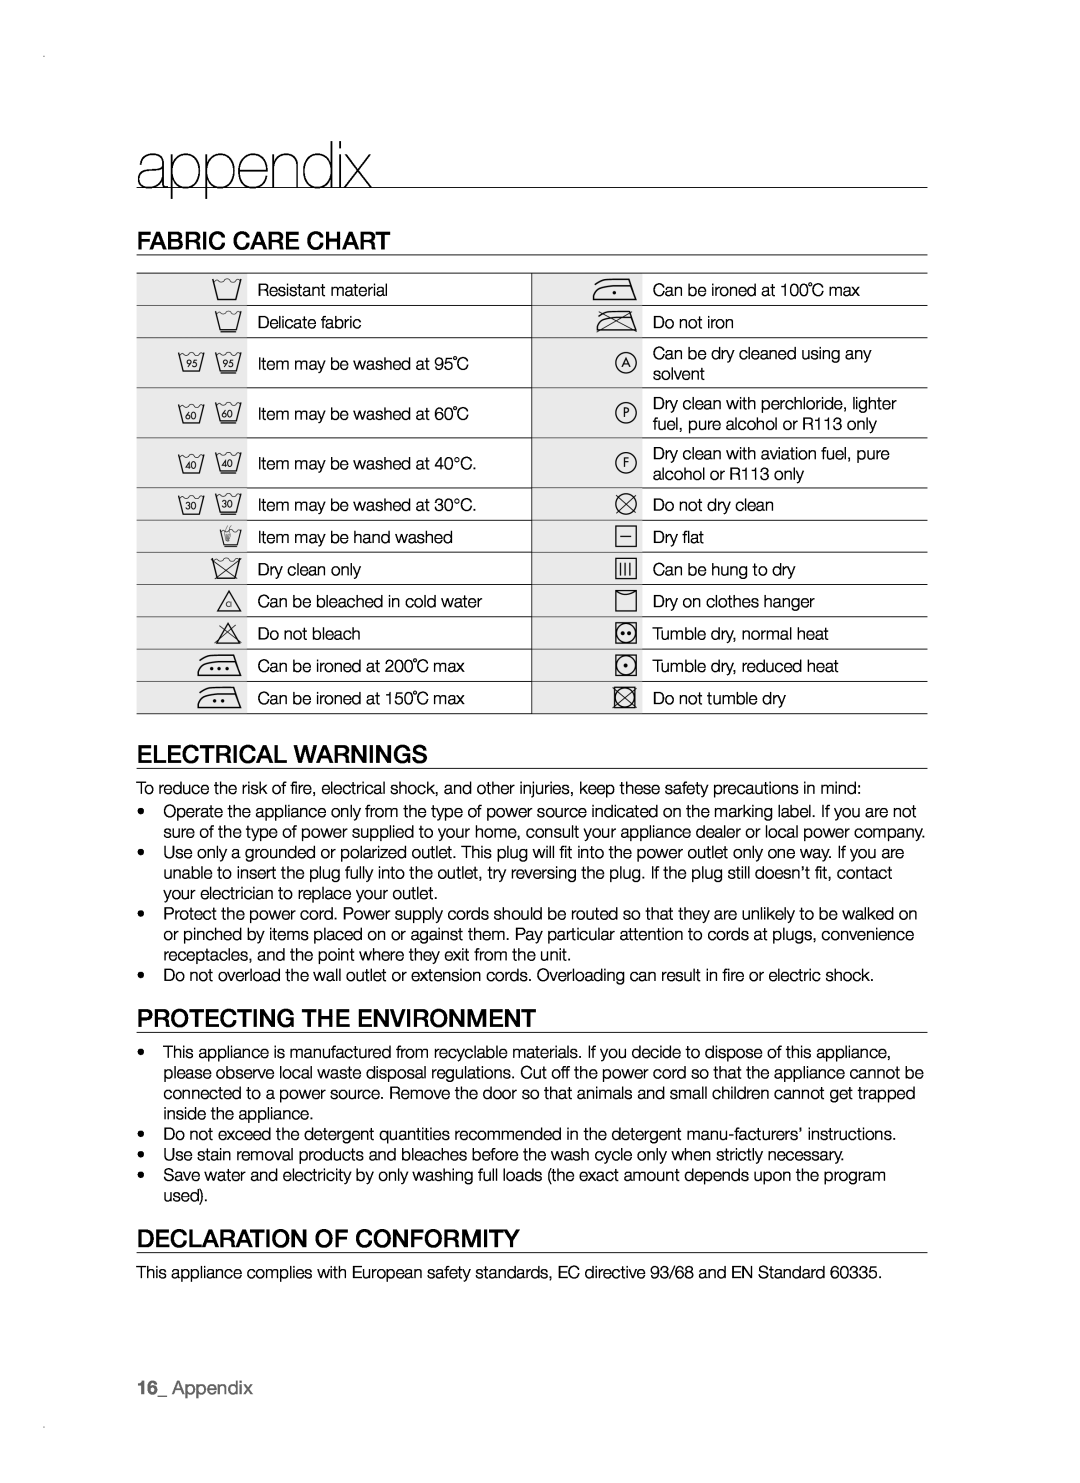 Samsung WF-B1261 appendix, Fabric Care Chart, Electrical Warnings, Protecting The Environment, Declaration Of Conformity 